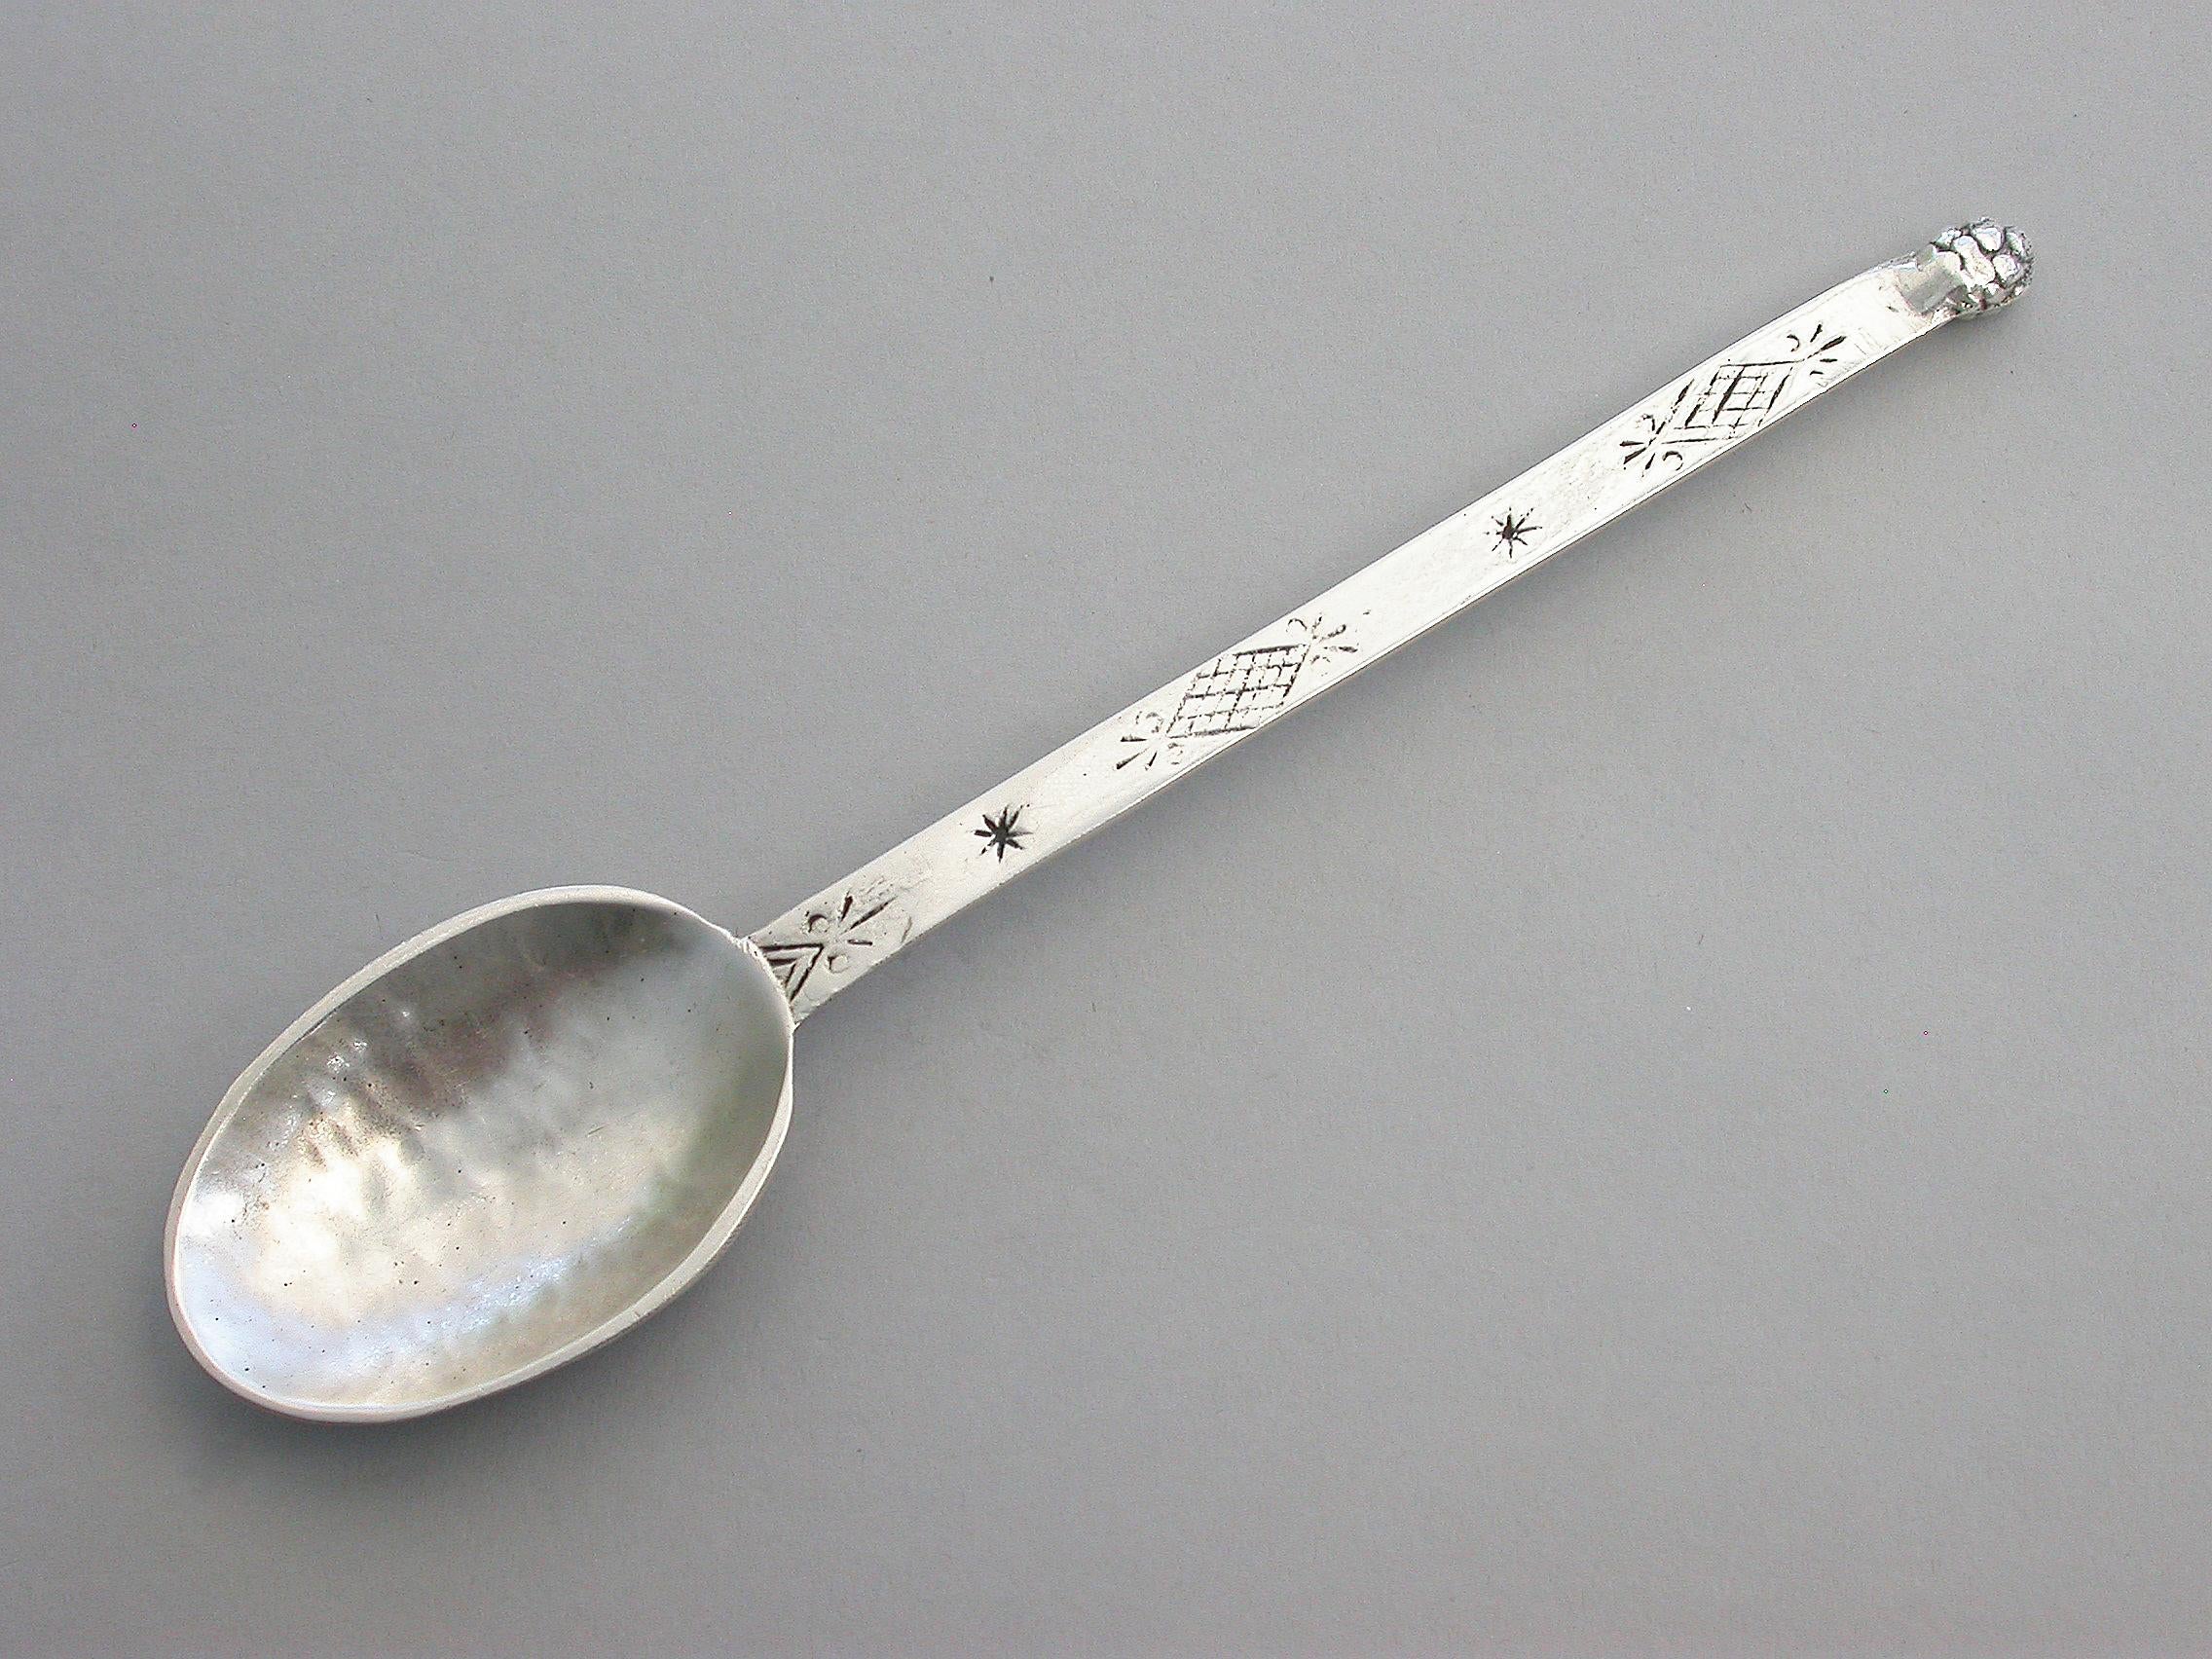 A rare Arts & Crafts hammered silver spoon, the flat handle chased with Celtic motifs.

By Francis Harling, (Amy Sandheim's younger sister) London, 1926.

In good condition with no damage or repair

Measures: Height 162 mm (6.38 inches)
Width